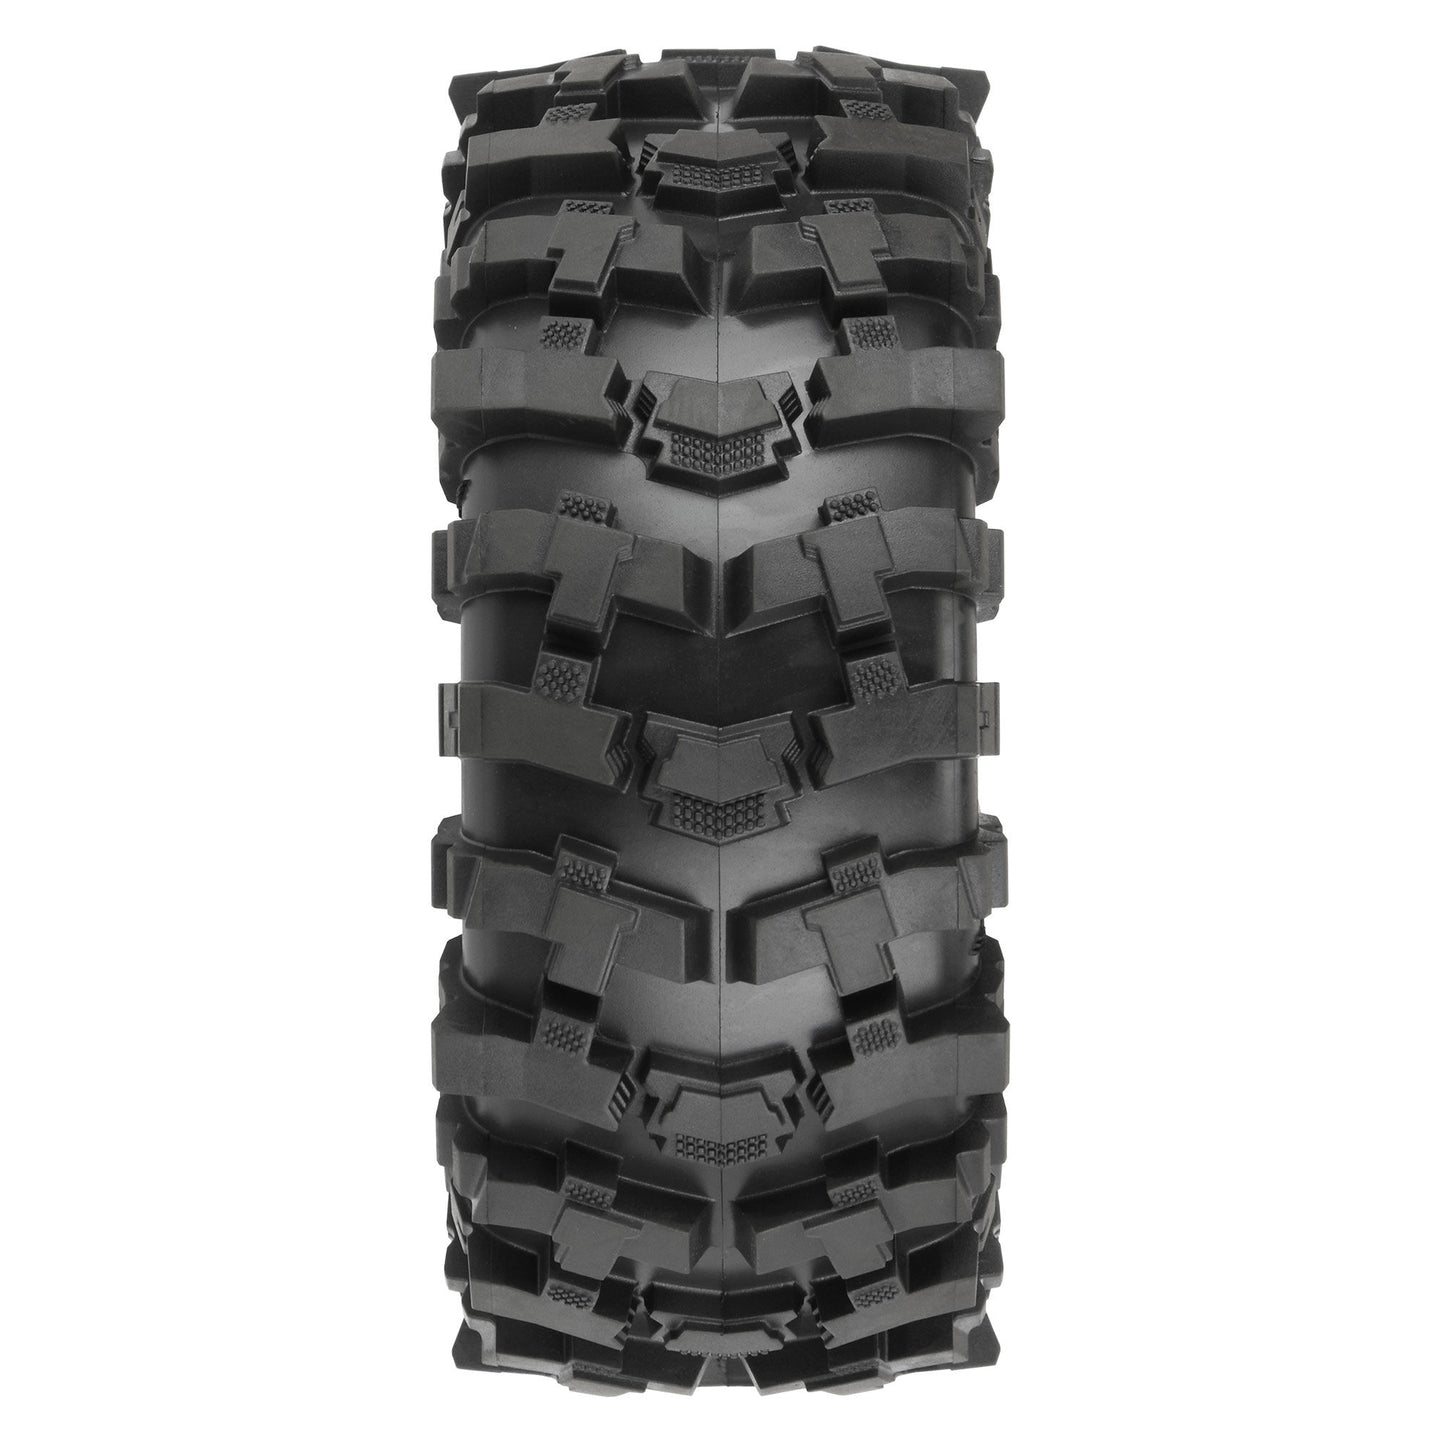 Pro-Line Racing PRO1021310 1:10 G8 F/R 1.9" MTD 12mm Blk Holcomb (Pack of 2)